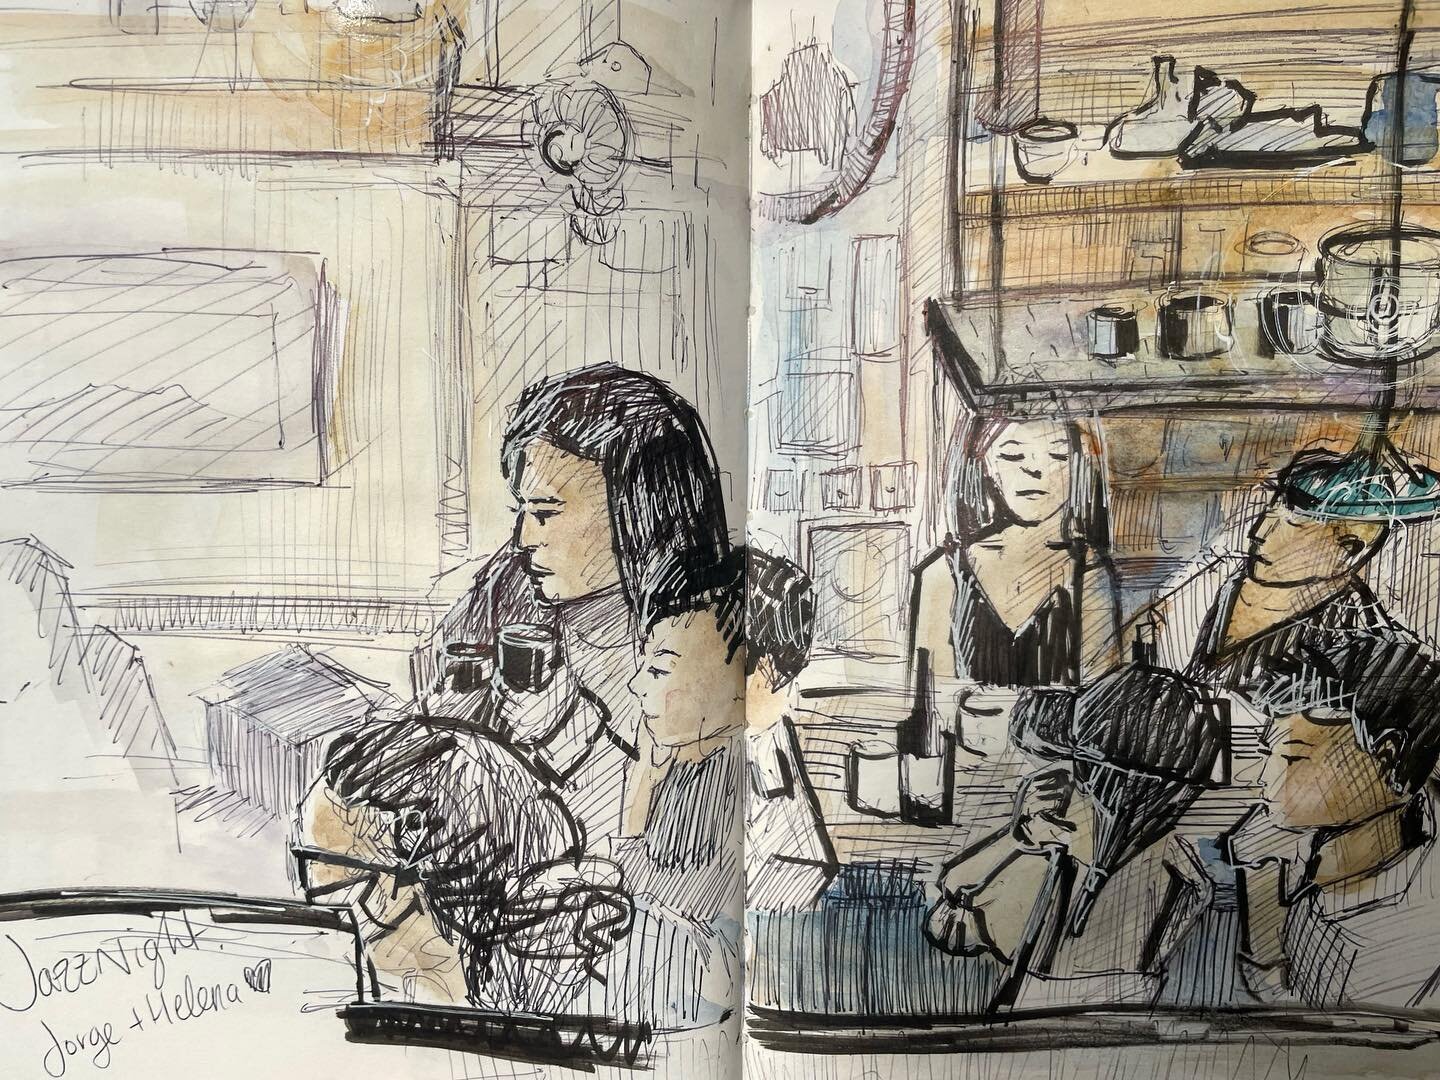 Attended an incredible, cosy, beautiful jazz night on Saturday with my friends @helena___cyc and @mysticusbalatro ✨ Had an absolute blast 🙌 The music was inspirational and guided this drawing! Was good to take a break from hectic HK life. 
🎨🎷
#jaz